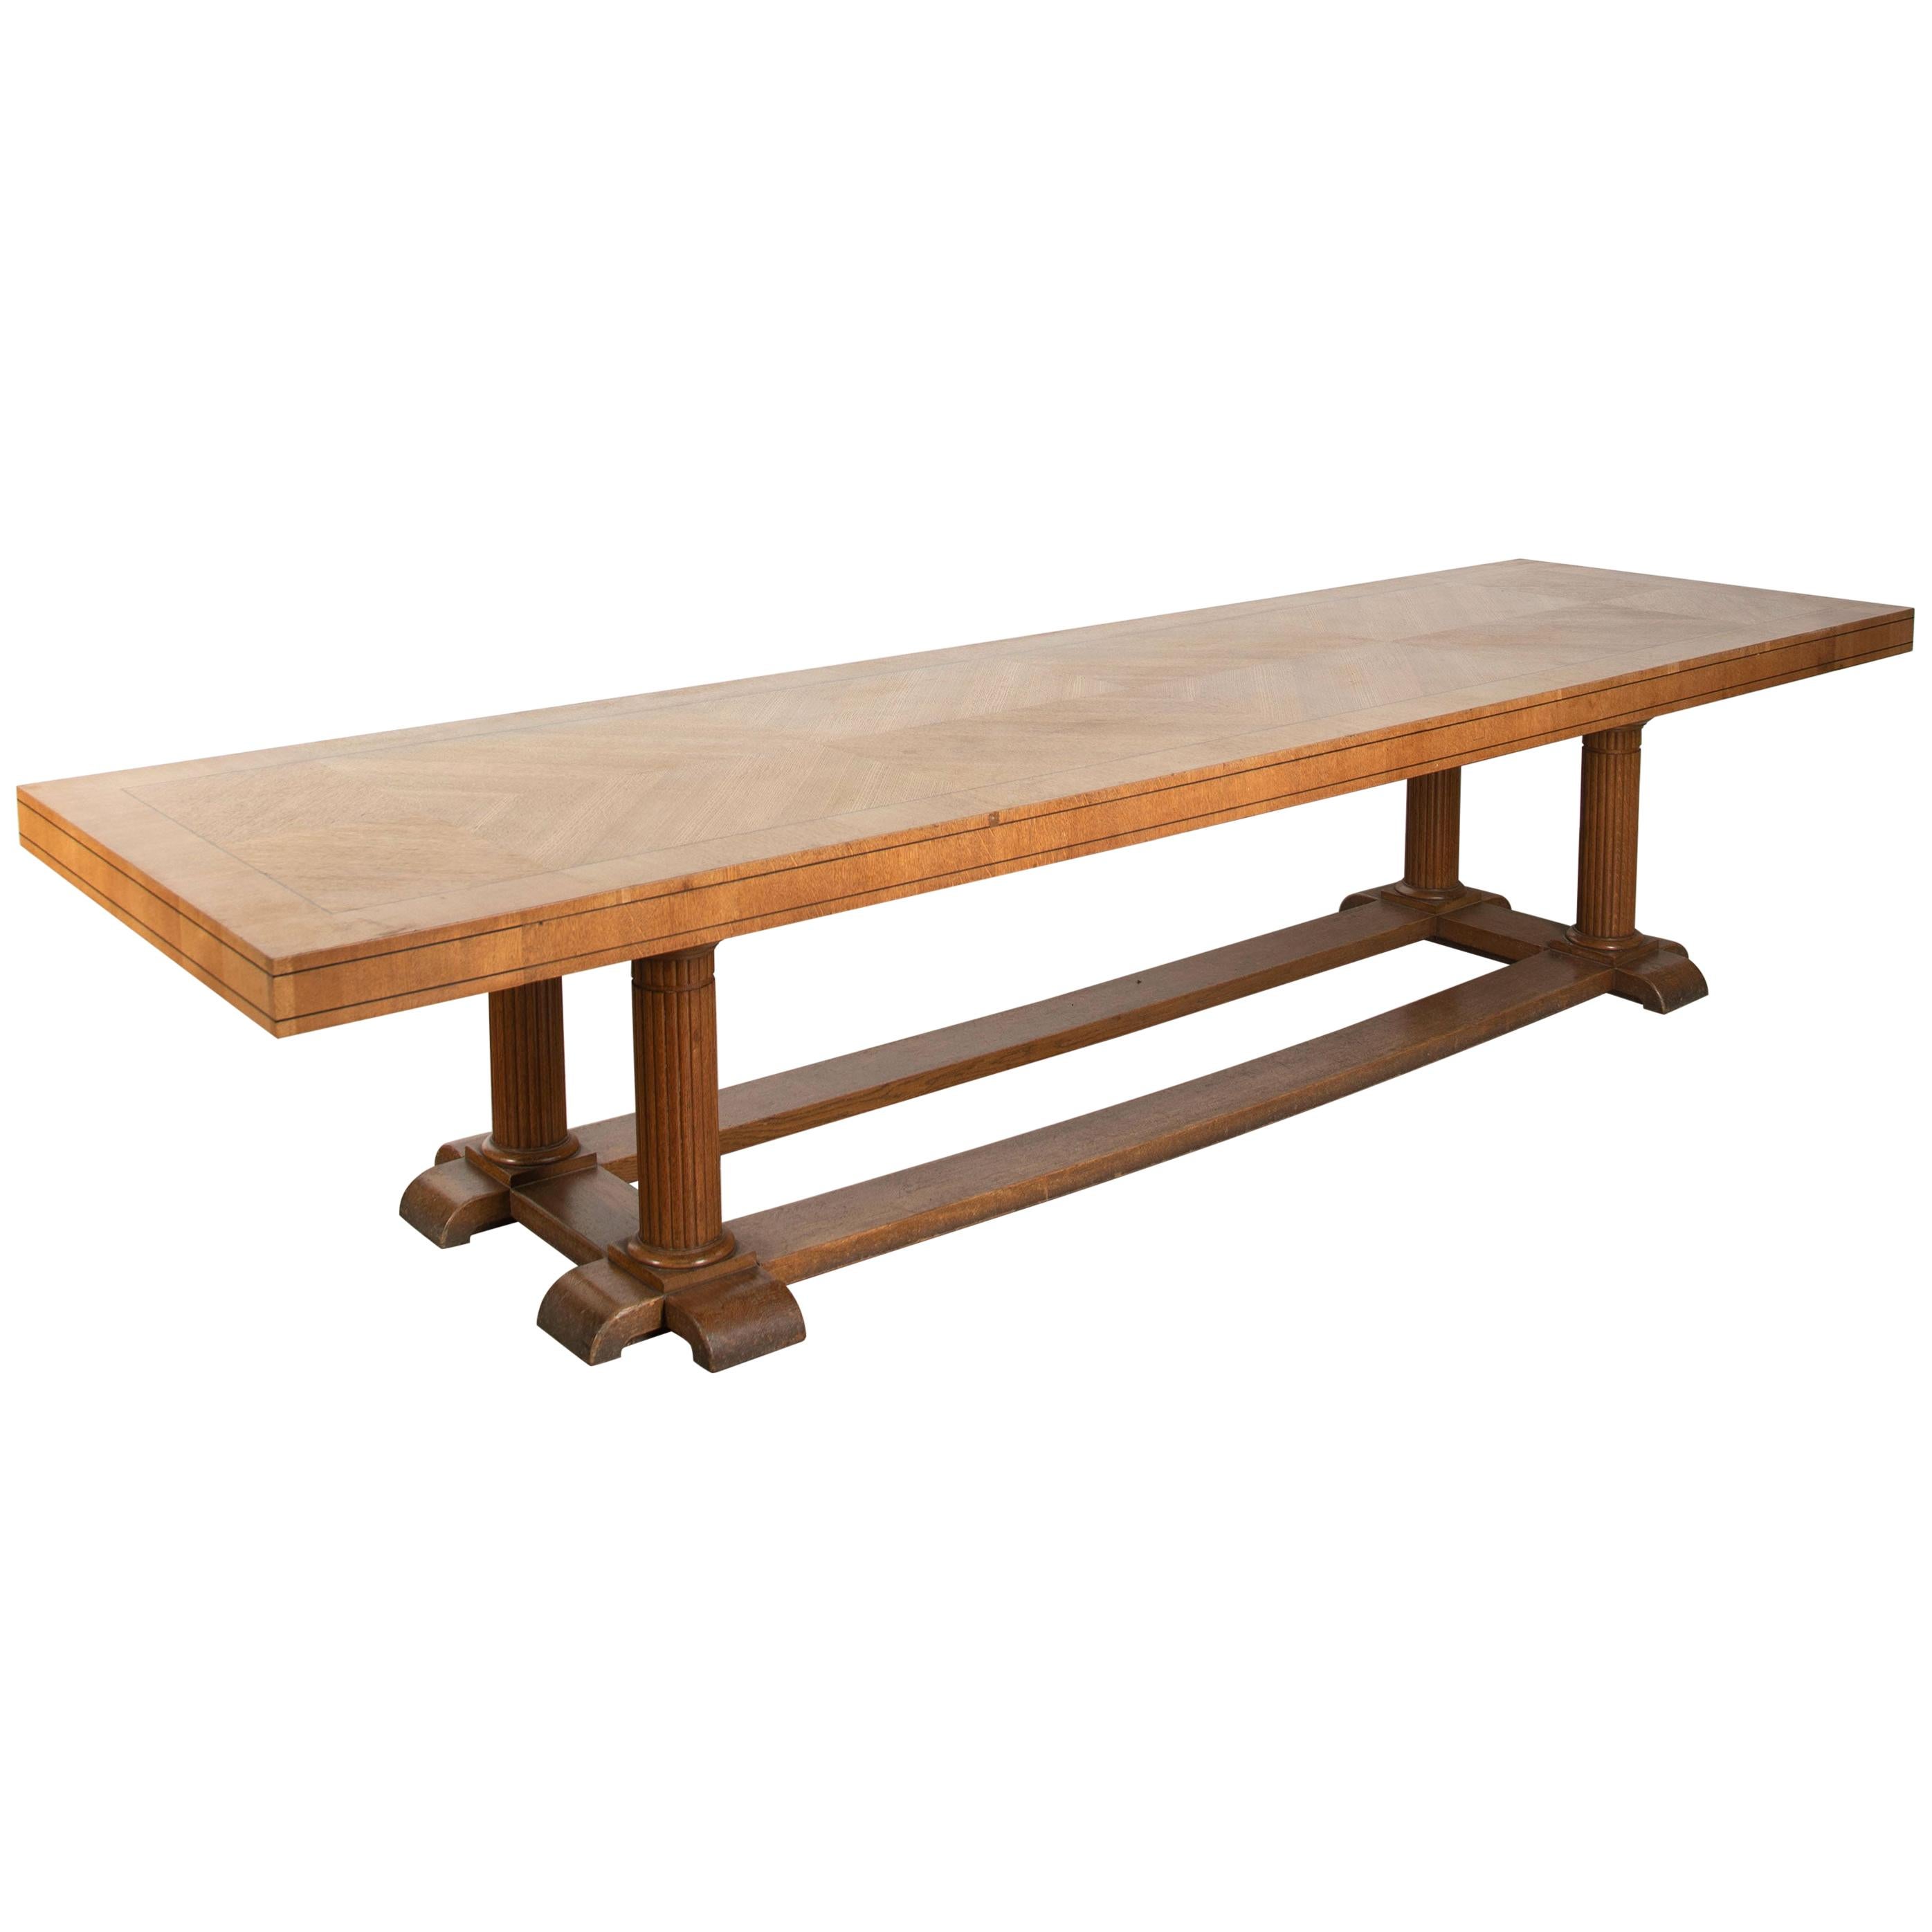 Large Arts & Crafts English Oak Refectory Dining Table